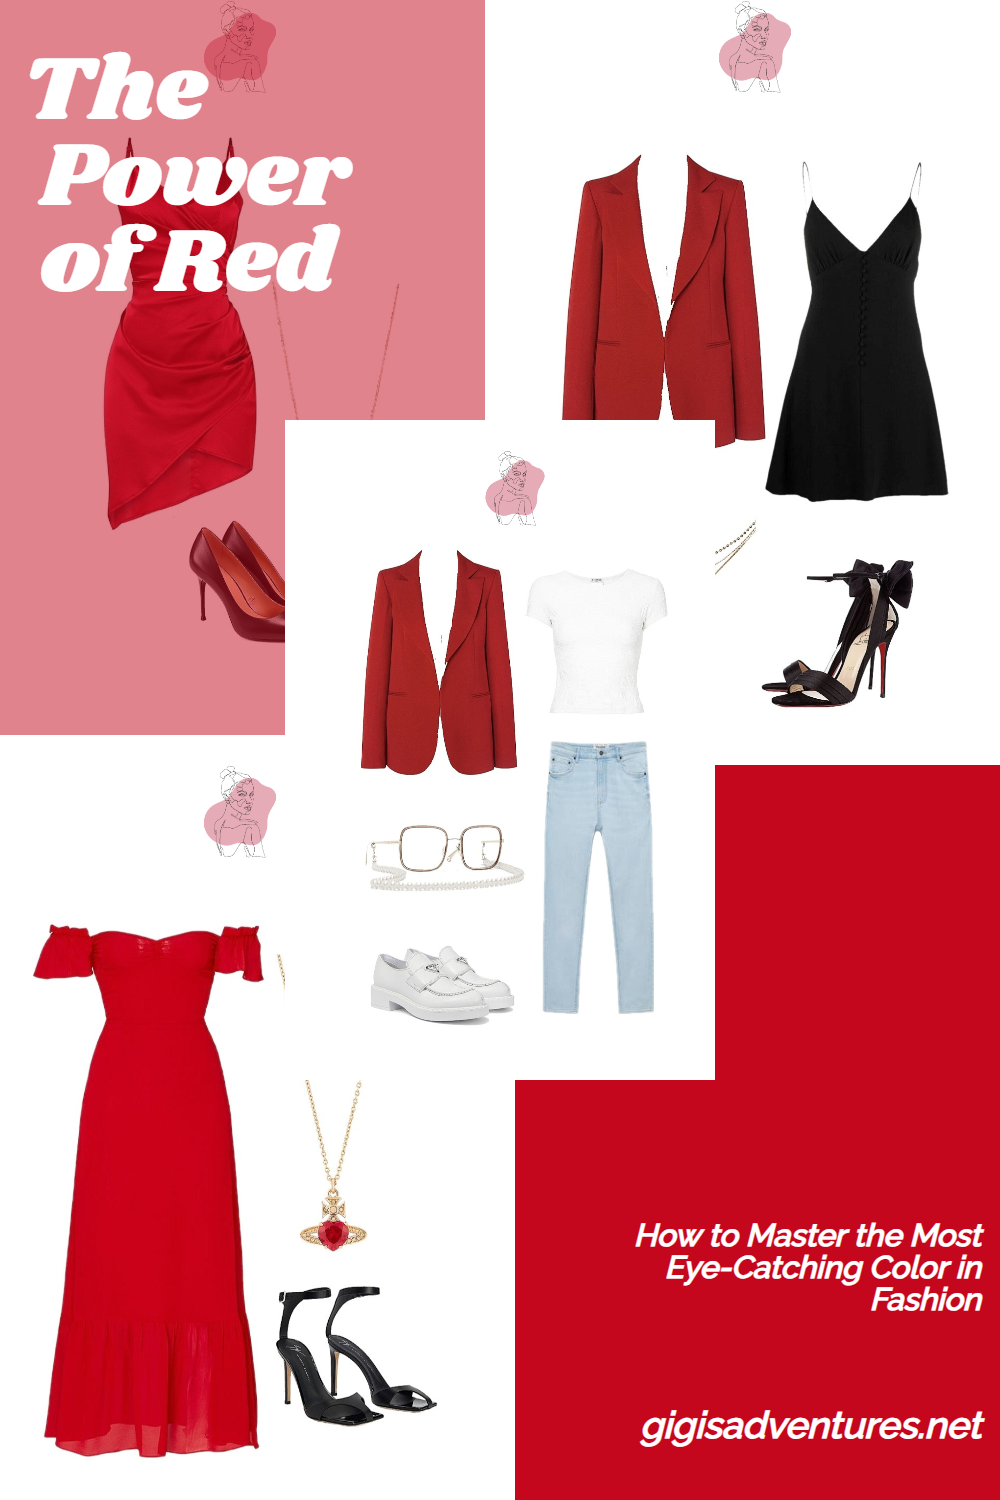 The Power of Red: How to Master the Most Eye-Catching Color in Fashion